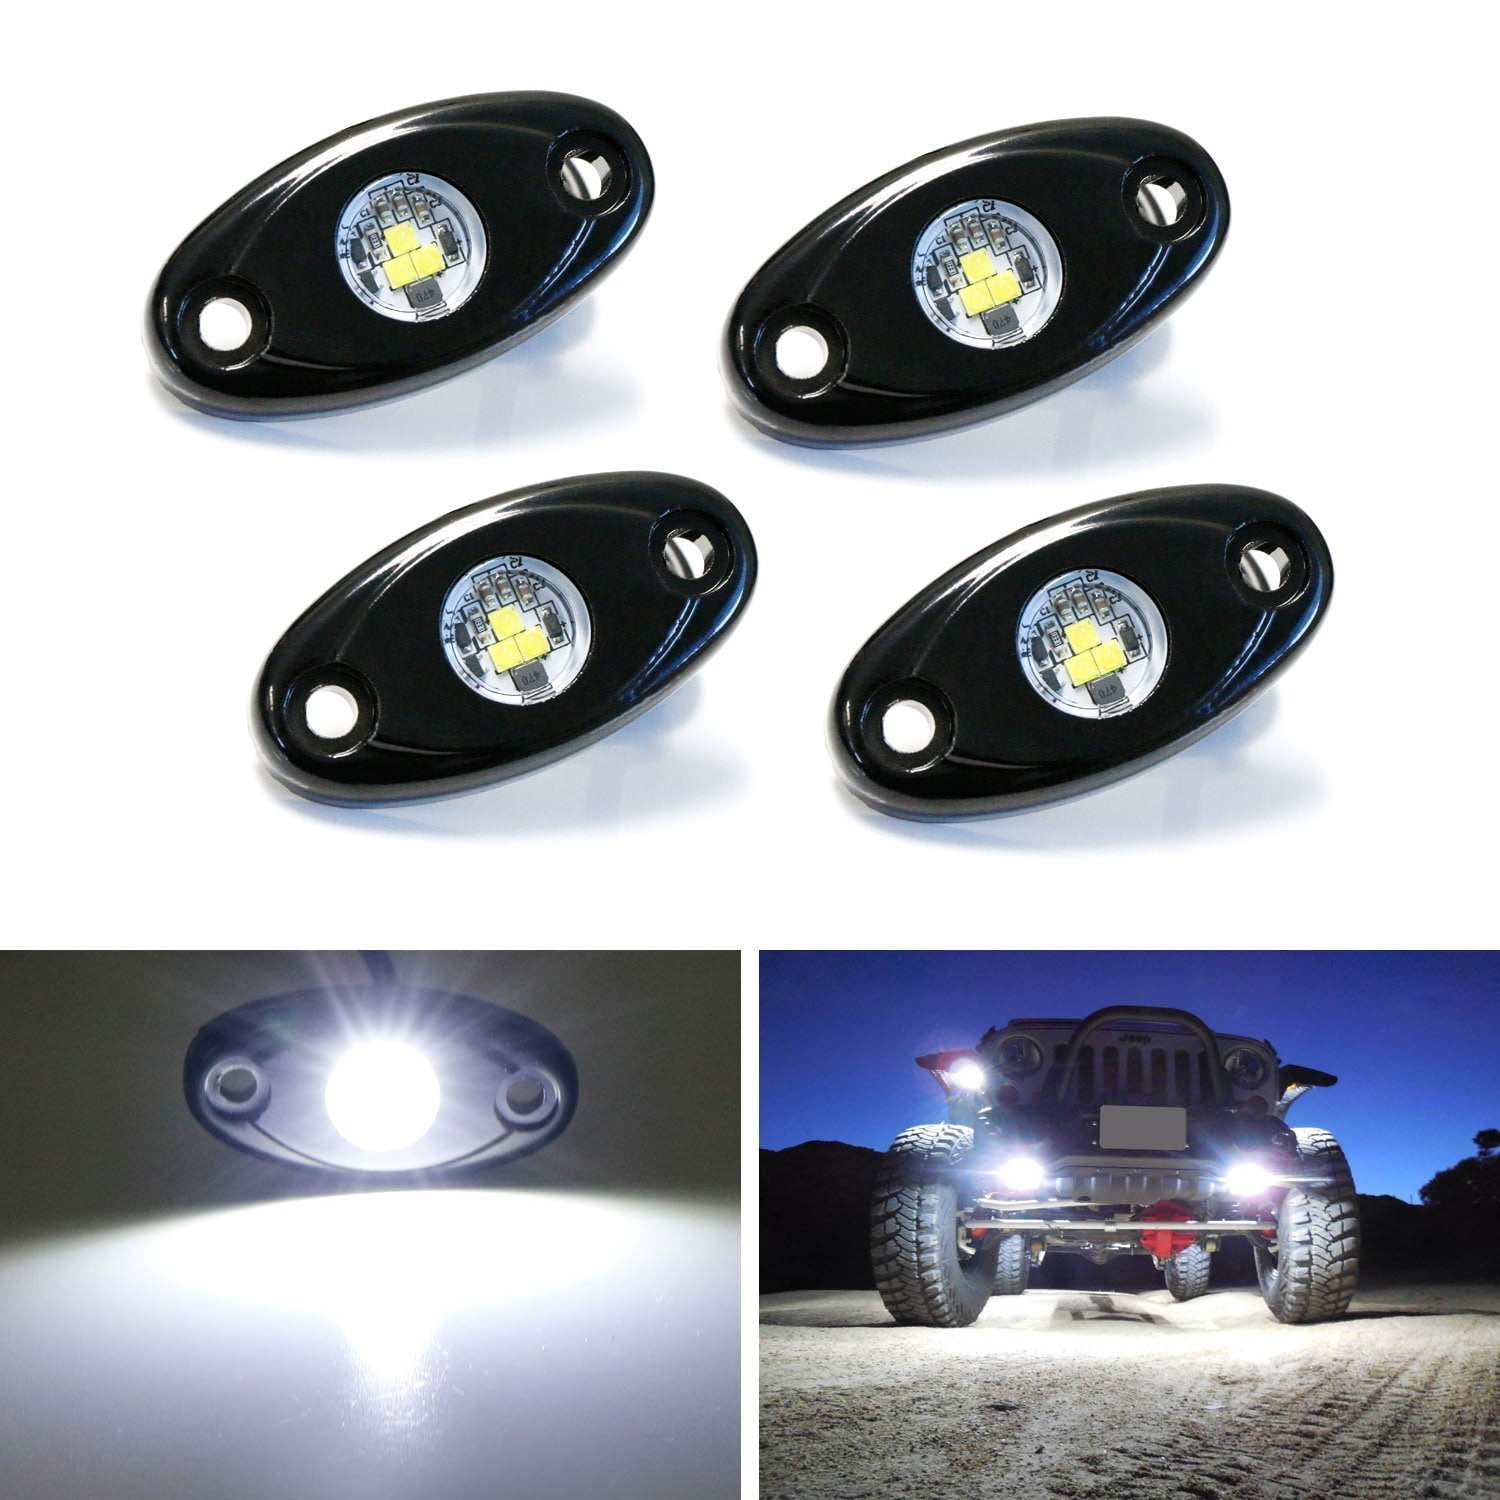 4x 9W 2" White CREE LED Rock Light Bar Wheel RV For Jeep Truck SUV Off-Road Boat 